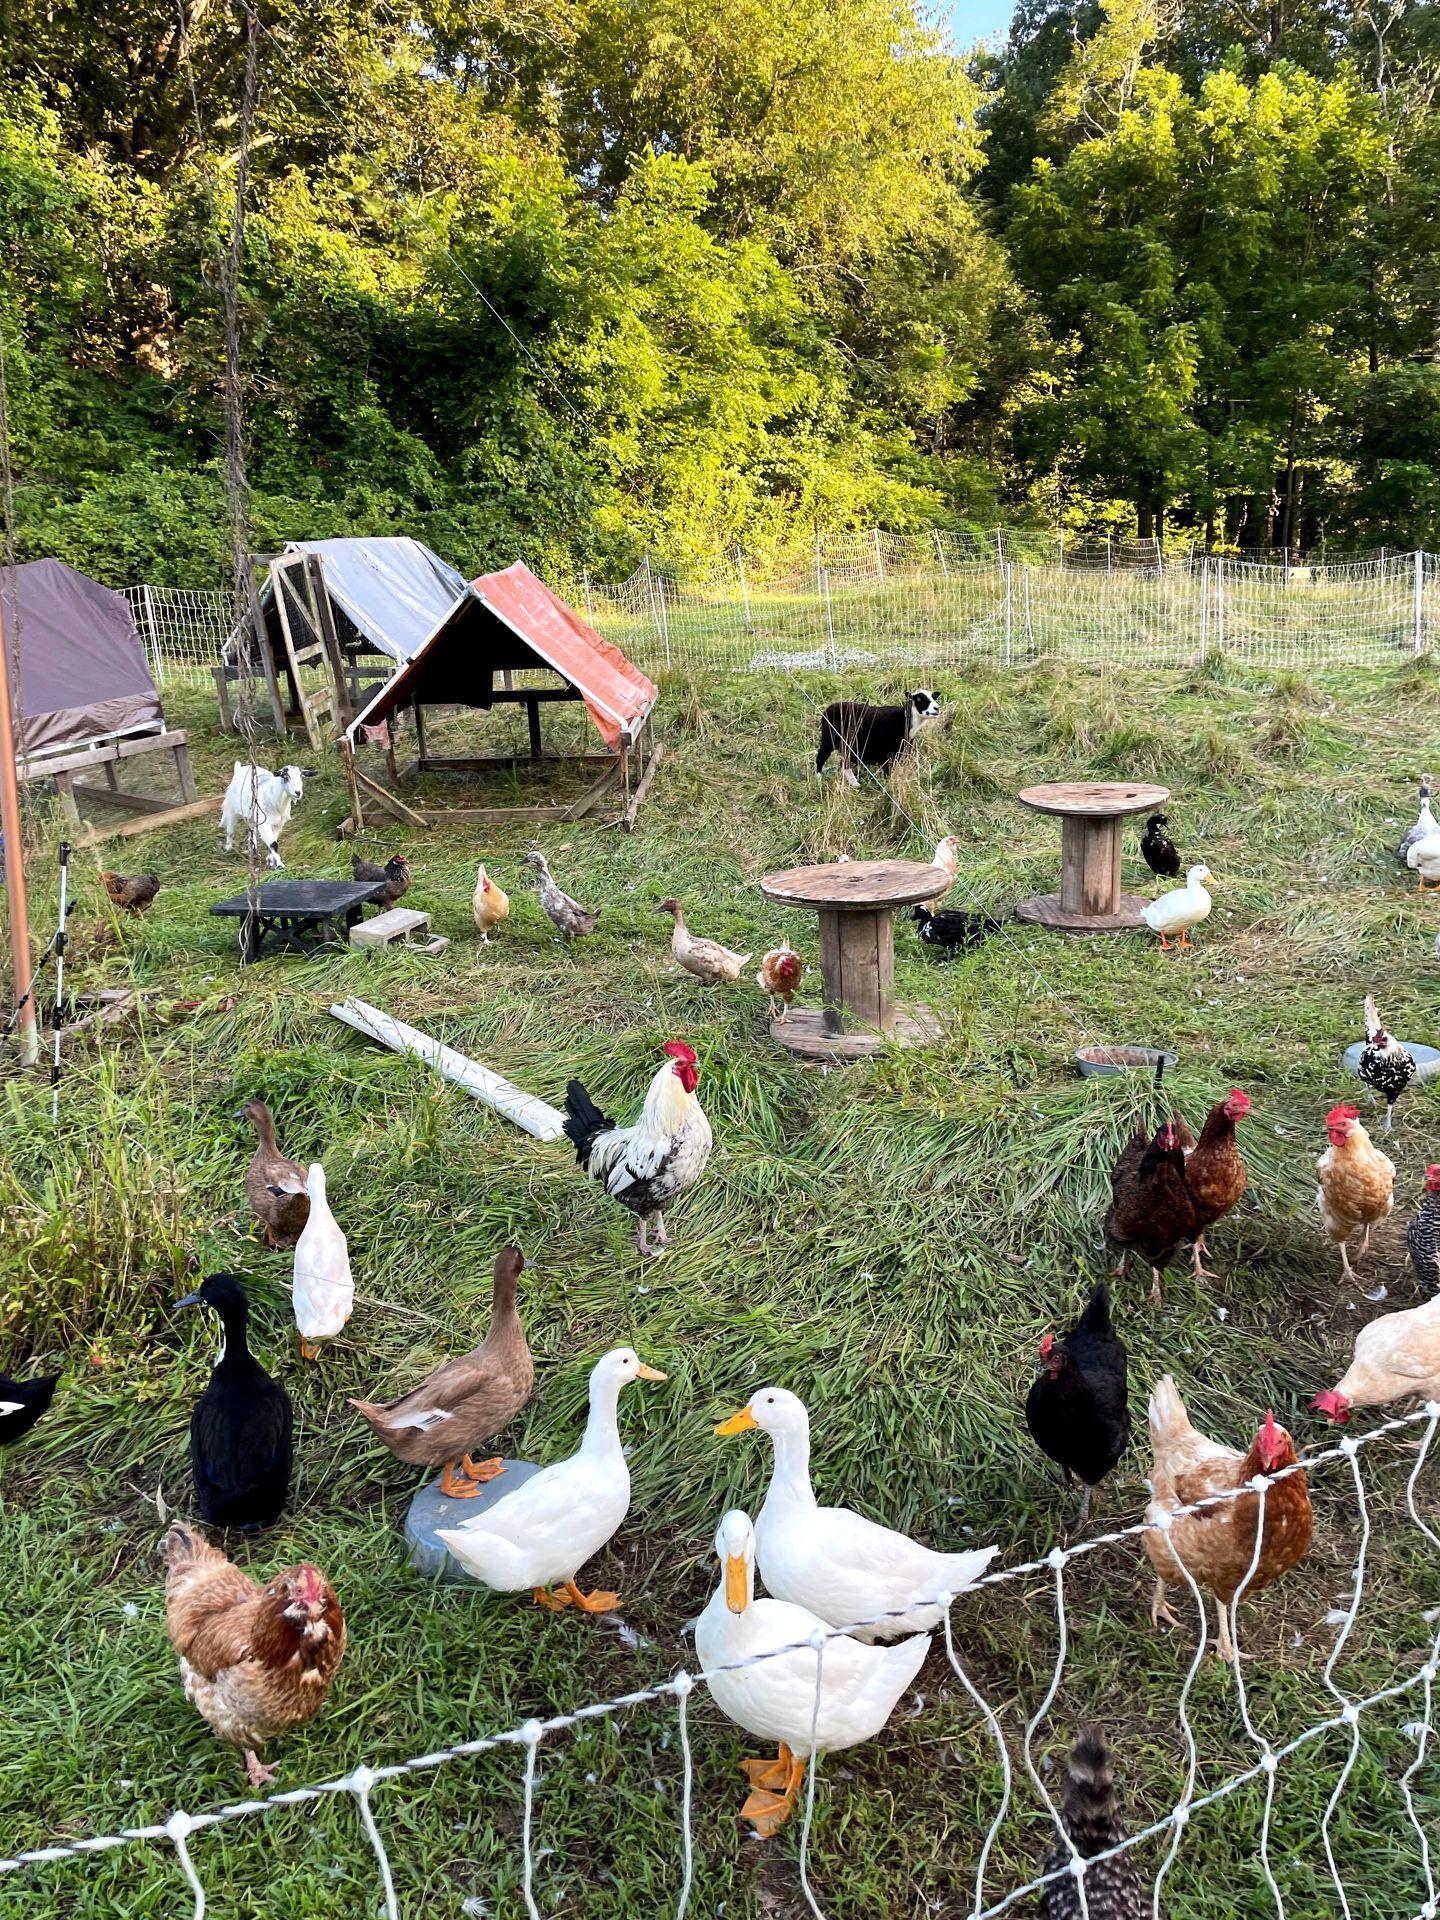 A group of chickens, ducks and goats at Sideways Farm and Brewery.